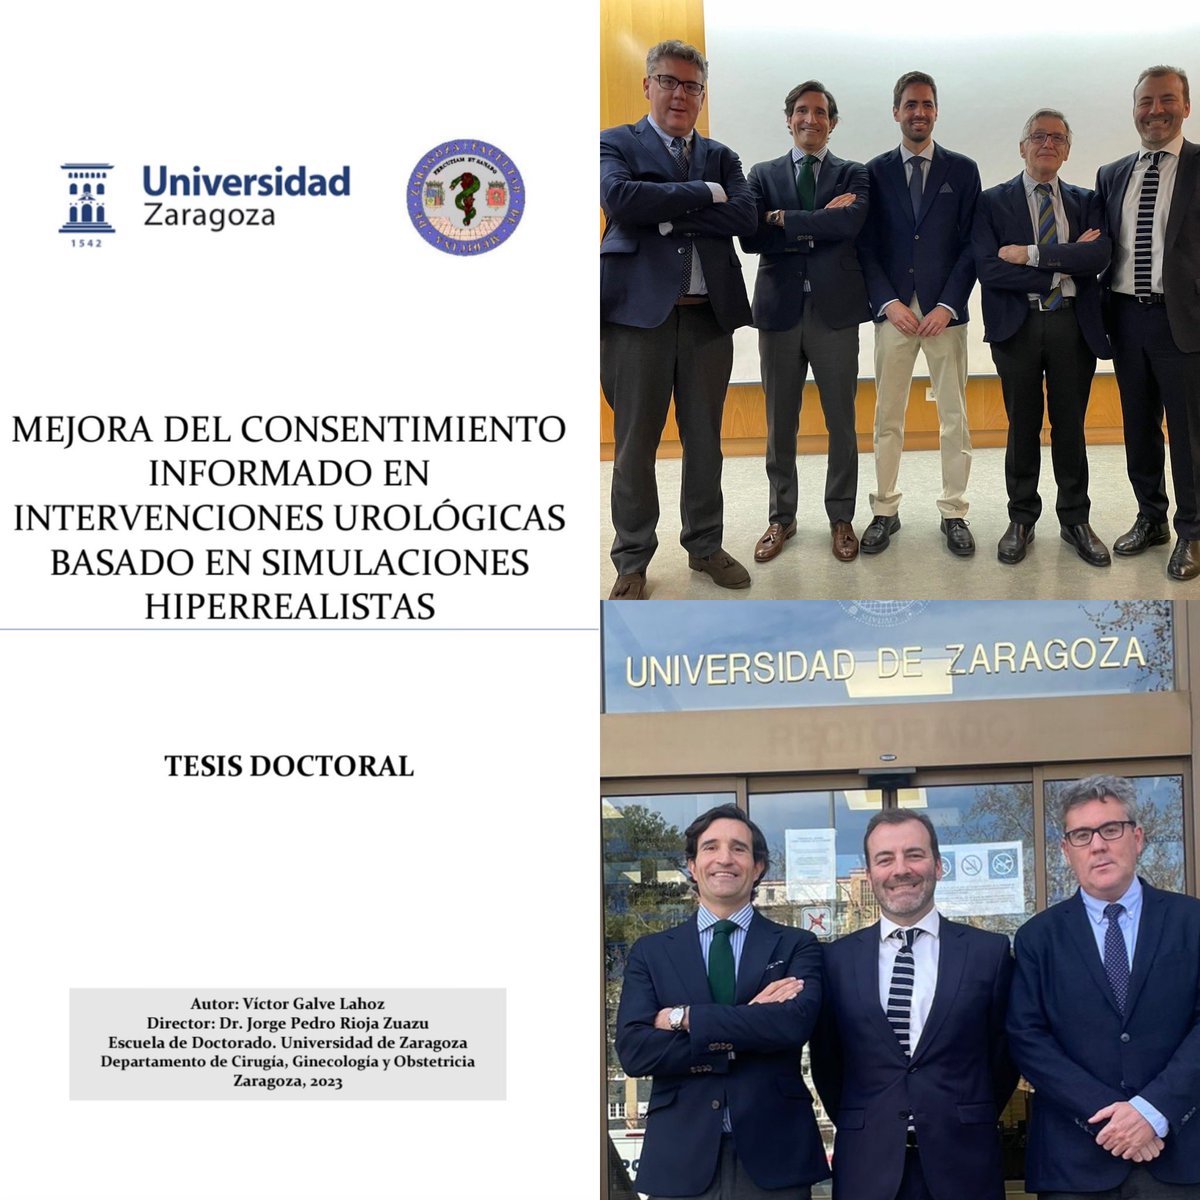 Special day, Víctor Gálvez defended his doctoral thesis at zaragoza University. Directed by @jorgeprioja very meticulous work and surprising for its originality, congratulations! In the Tribunal that I have had the honor of presiding, I have been accompanied by @malvarezmaestro